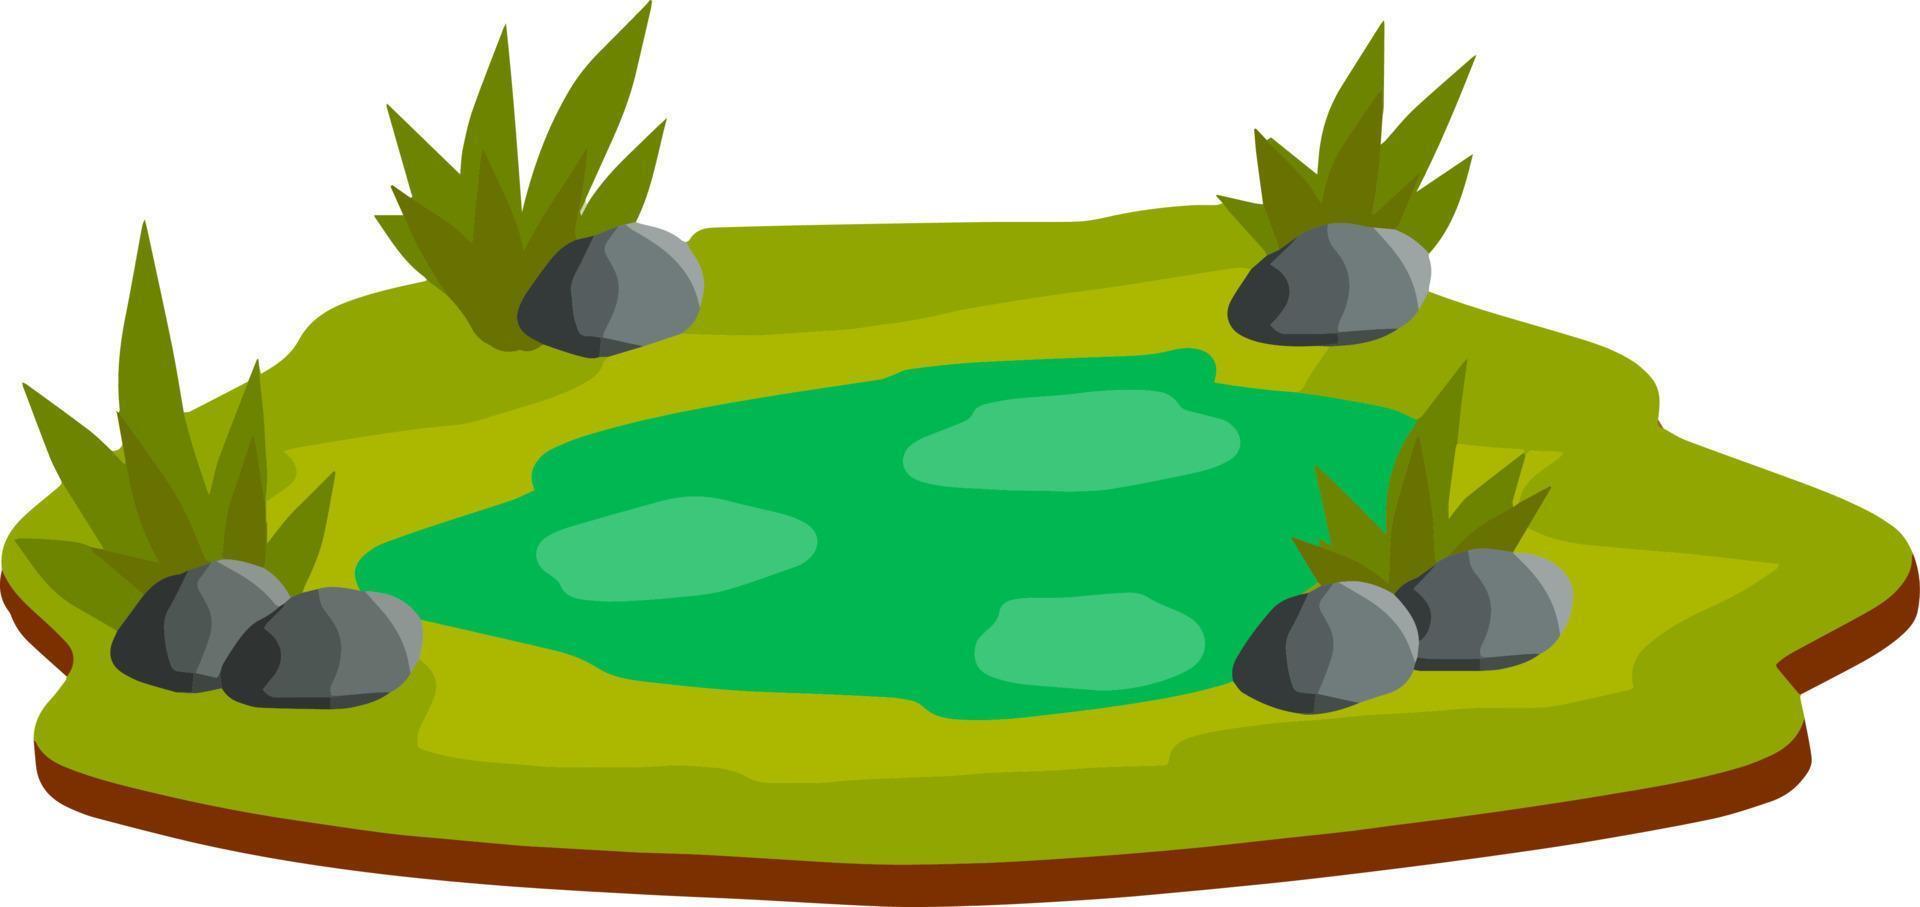 Pond and swamp, lake. Landscape with grass, stones. Platform and ground. Background for illustration. Flat cartoon. Element of nature and forests and water vector